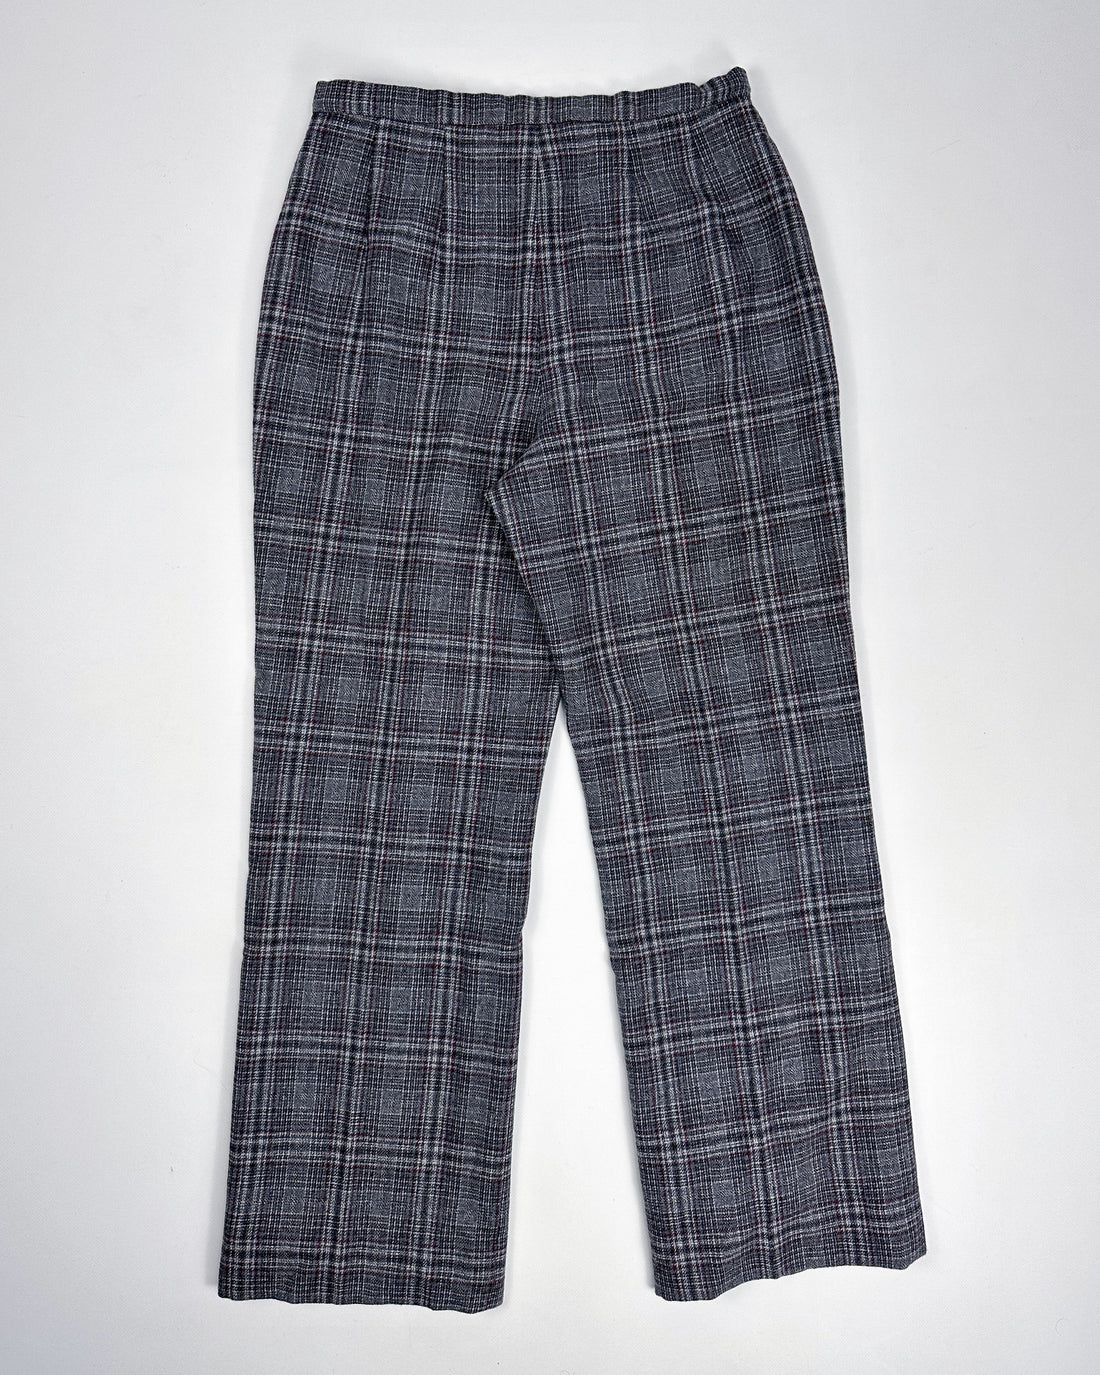 Pendleton Checkered Wool Pants (Made in USA) 1990's